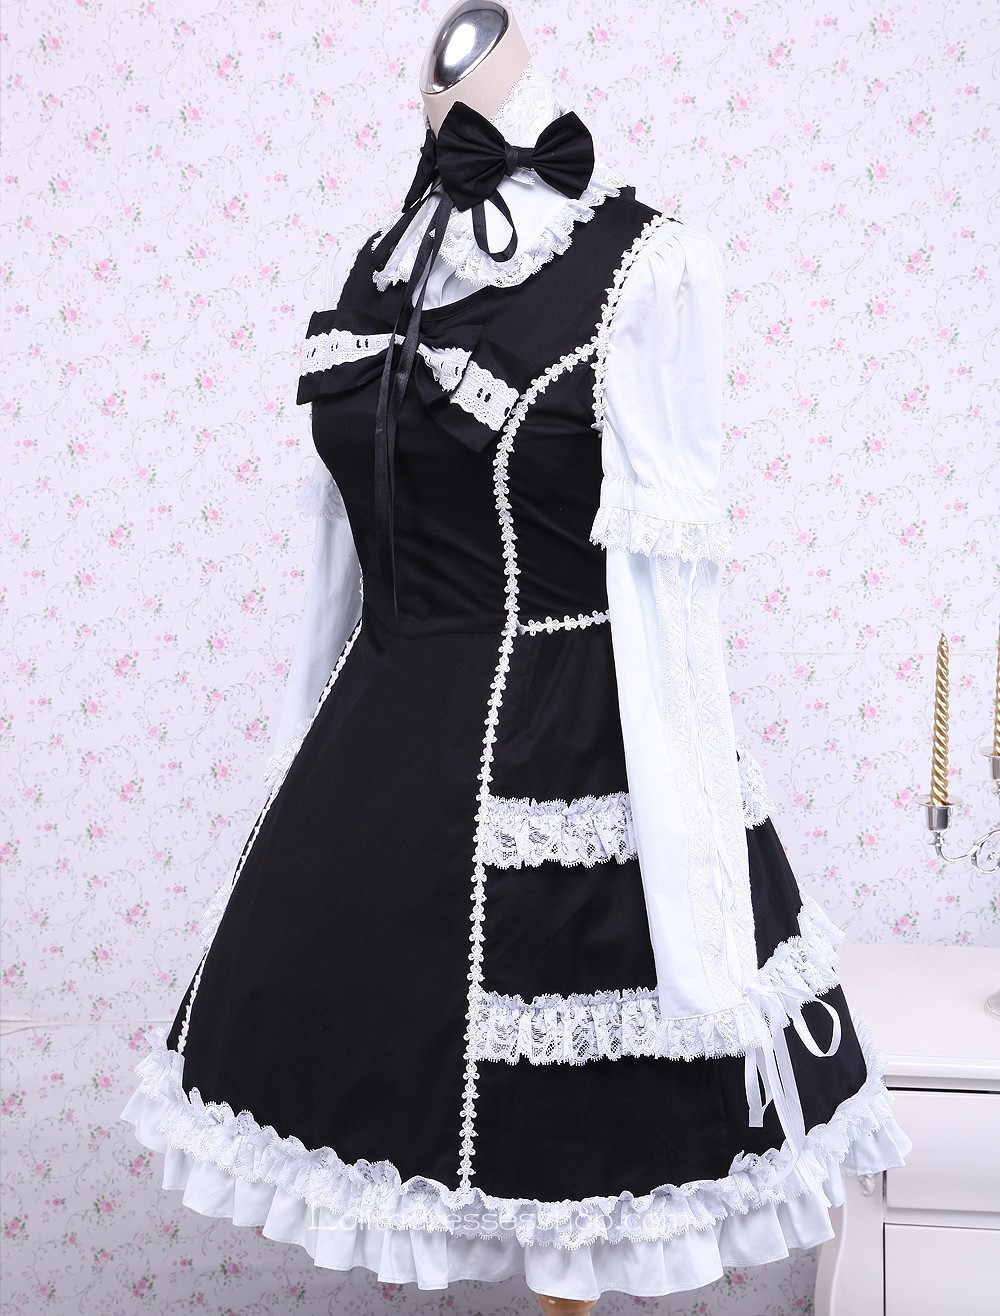 Black and White Cotton Long Sleeves Lace Trim Bow Gothic Lolita Dress